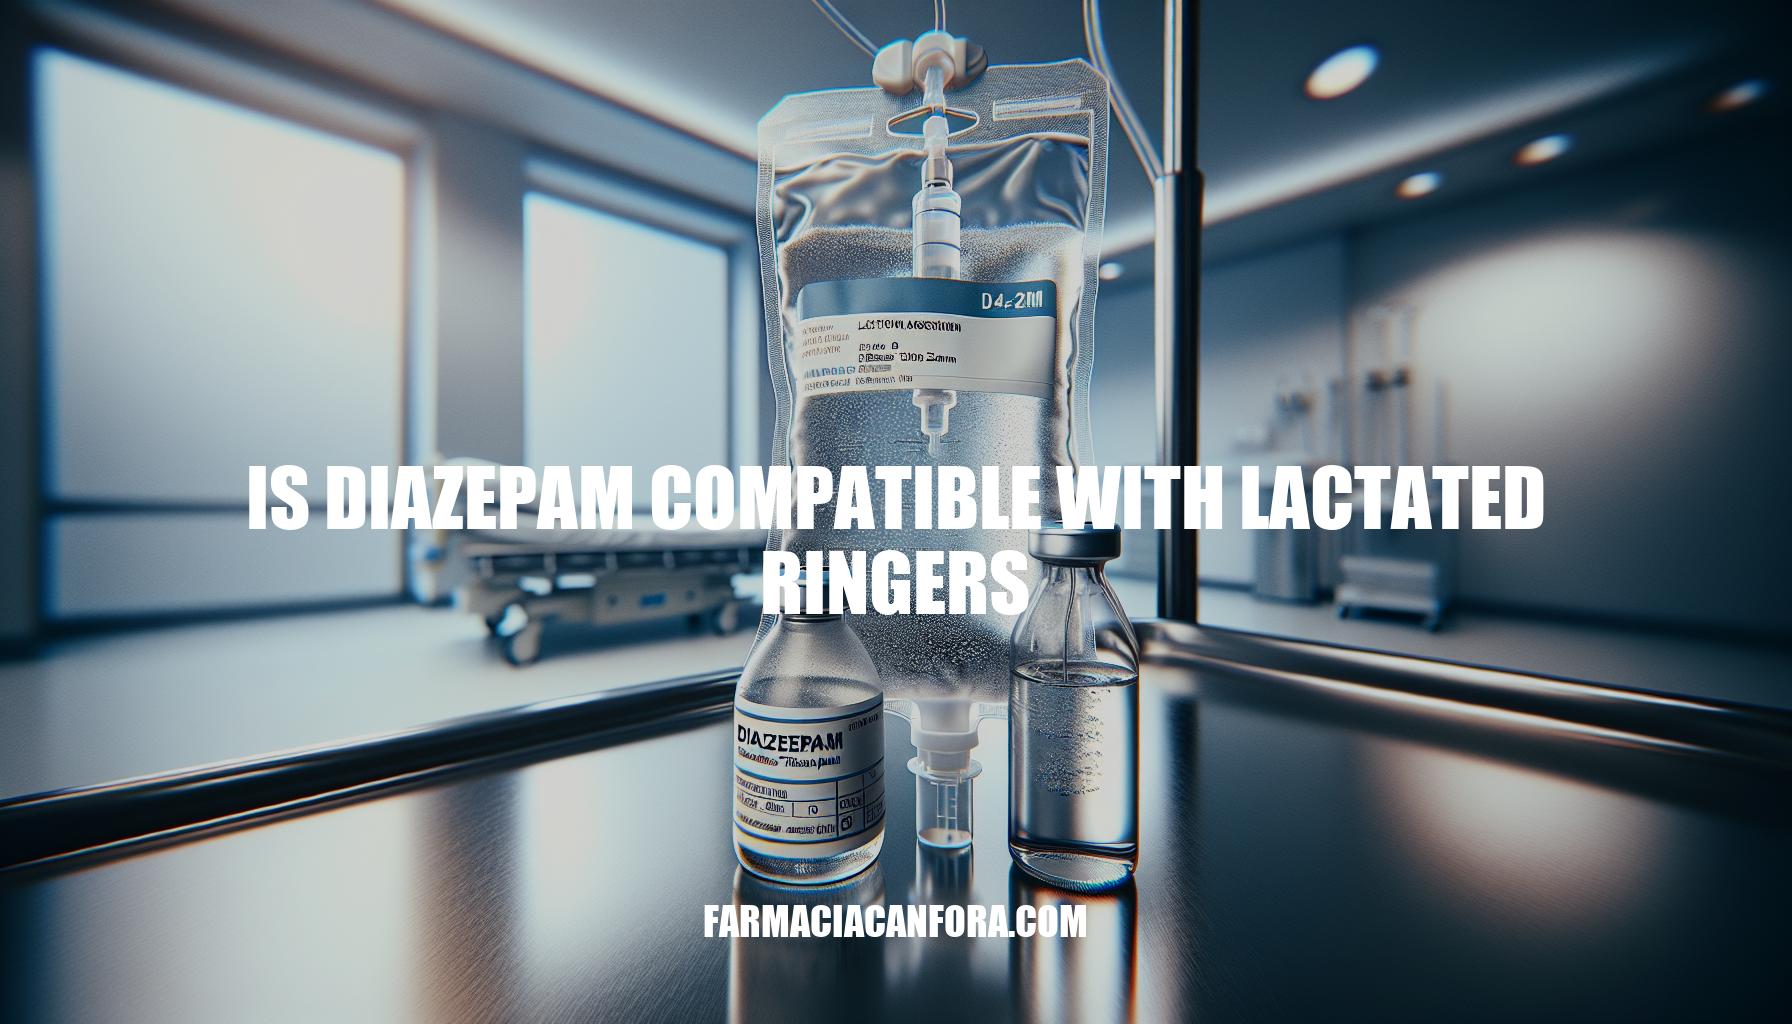 Is Diazepam Compatible with Lactated Ringers